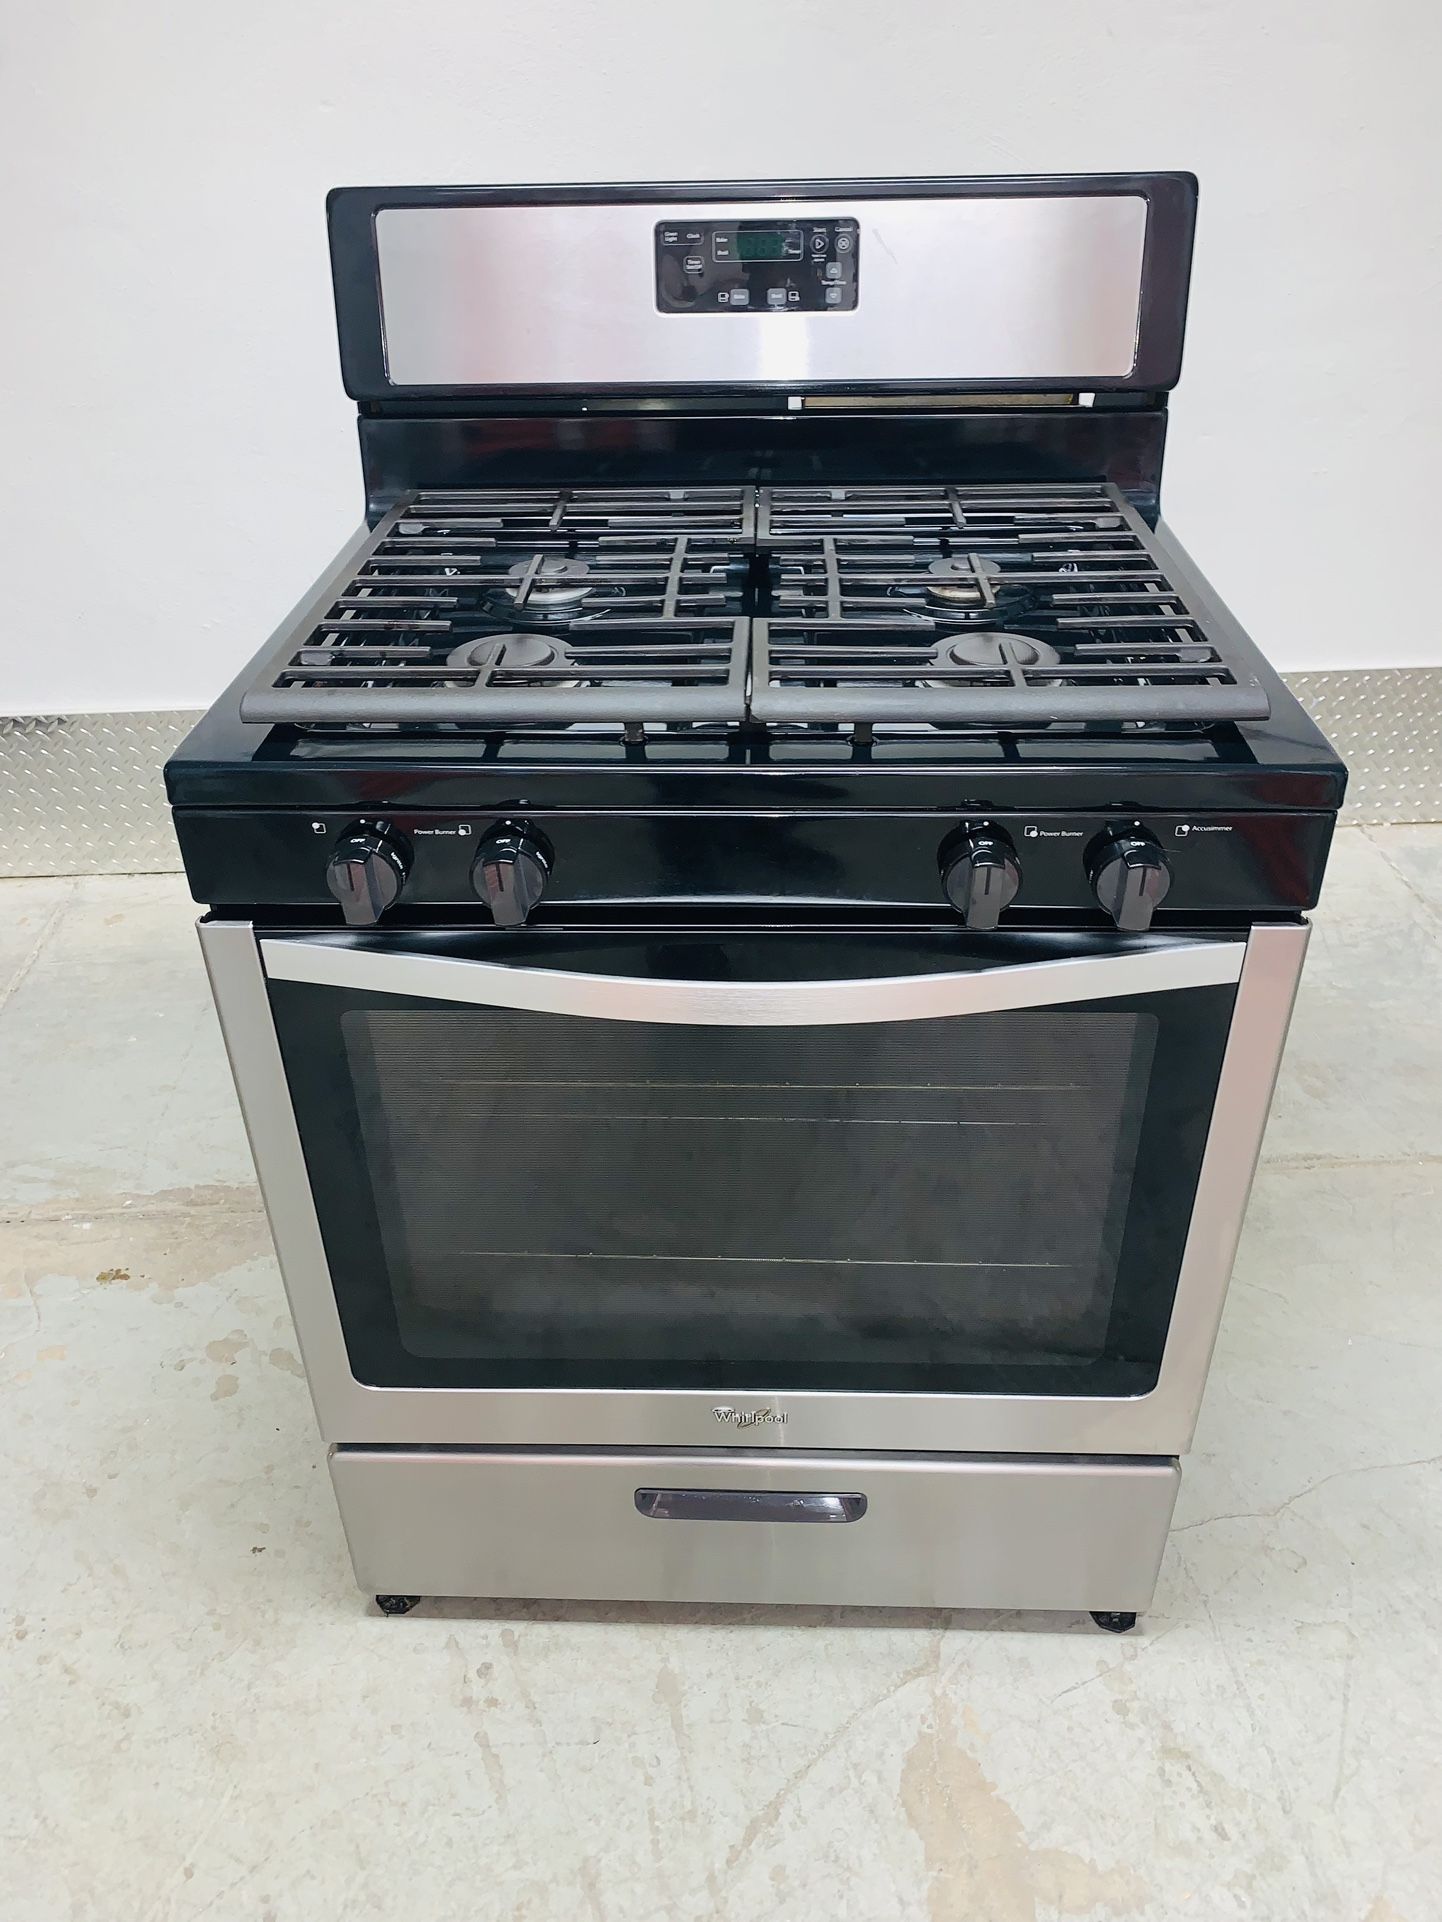 whirlpool stove in very perfect condition a receipt for 90 days warranty